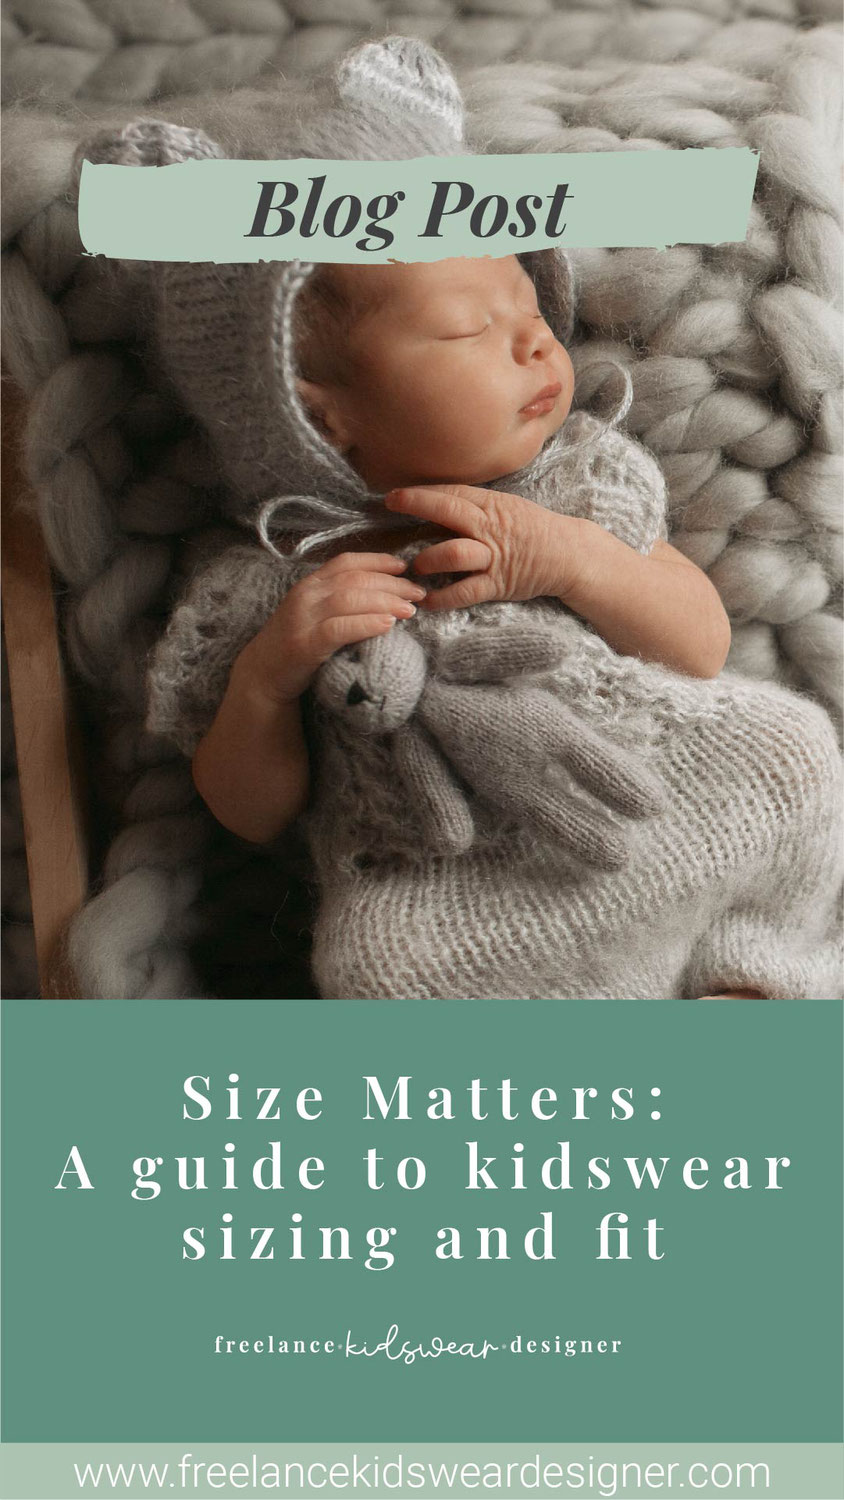 Size Matters: A guide to kidswear sizing and fit